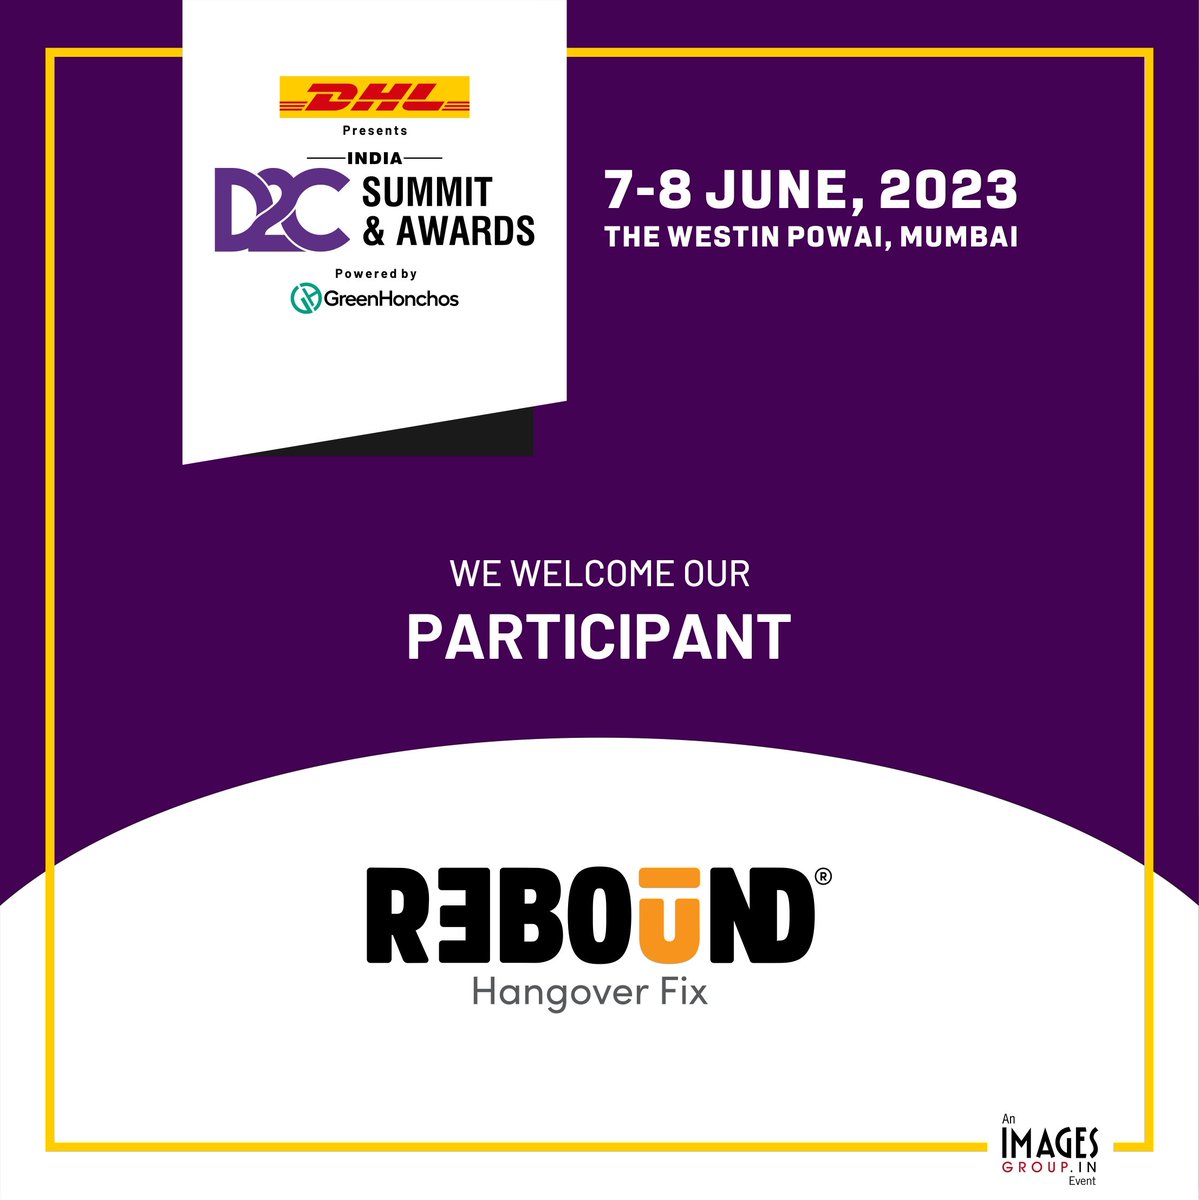 RT @D2C_summit: We're delighted to announce Aurea Biolabs (Rebound Hangover Fix) as our #Participant at #IndiaD2CSummit2023! 📅 - 7th & 8th June, 2023 📍- The Westin Powai, Mumbai 👉Reserve your seat now! lnkd.in/dPMCdiuq #d2c #d2csummit #ret…